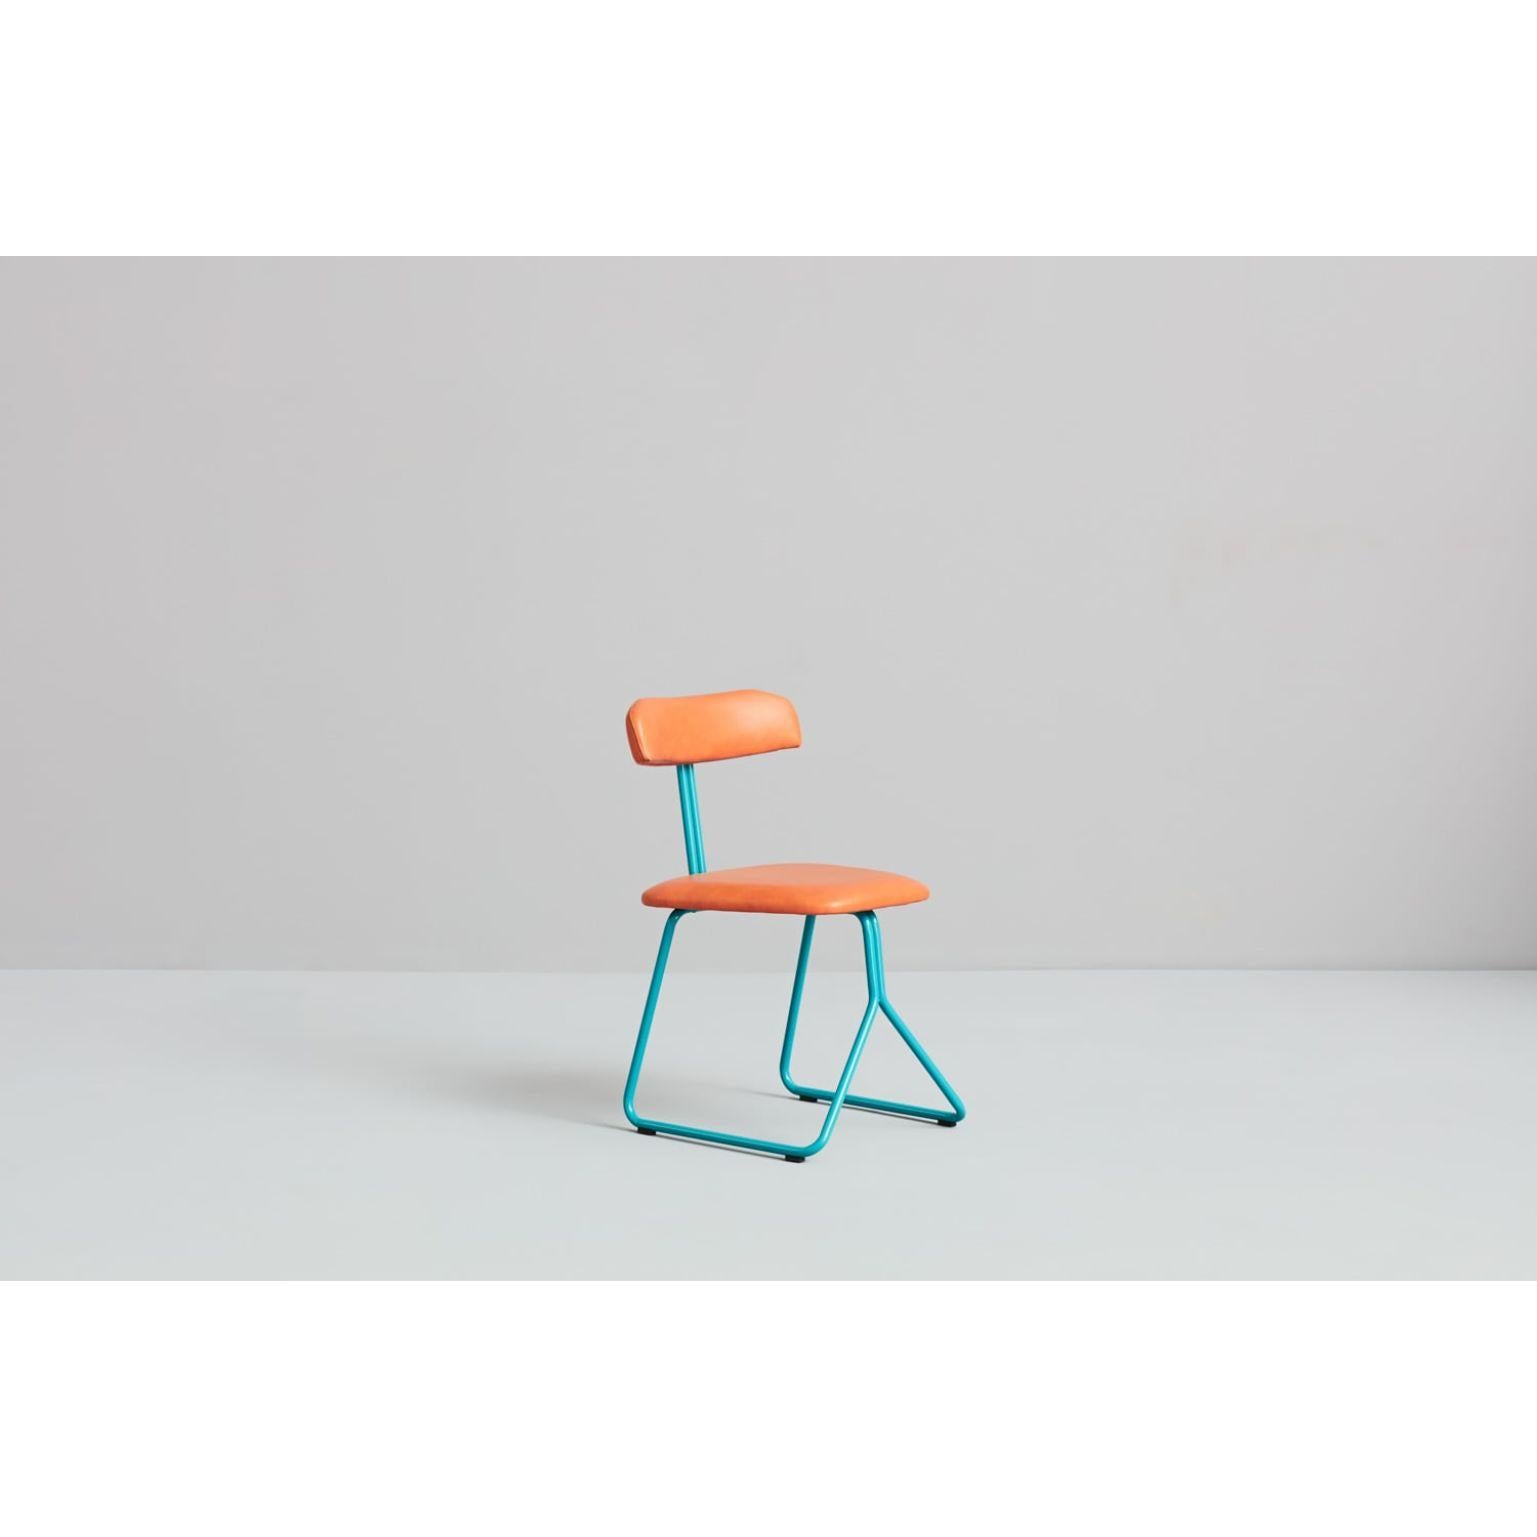 Iron A Set of Rider Stool & Chair by Pavel Vetrov